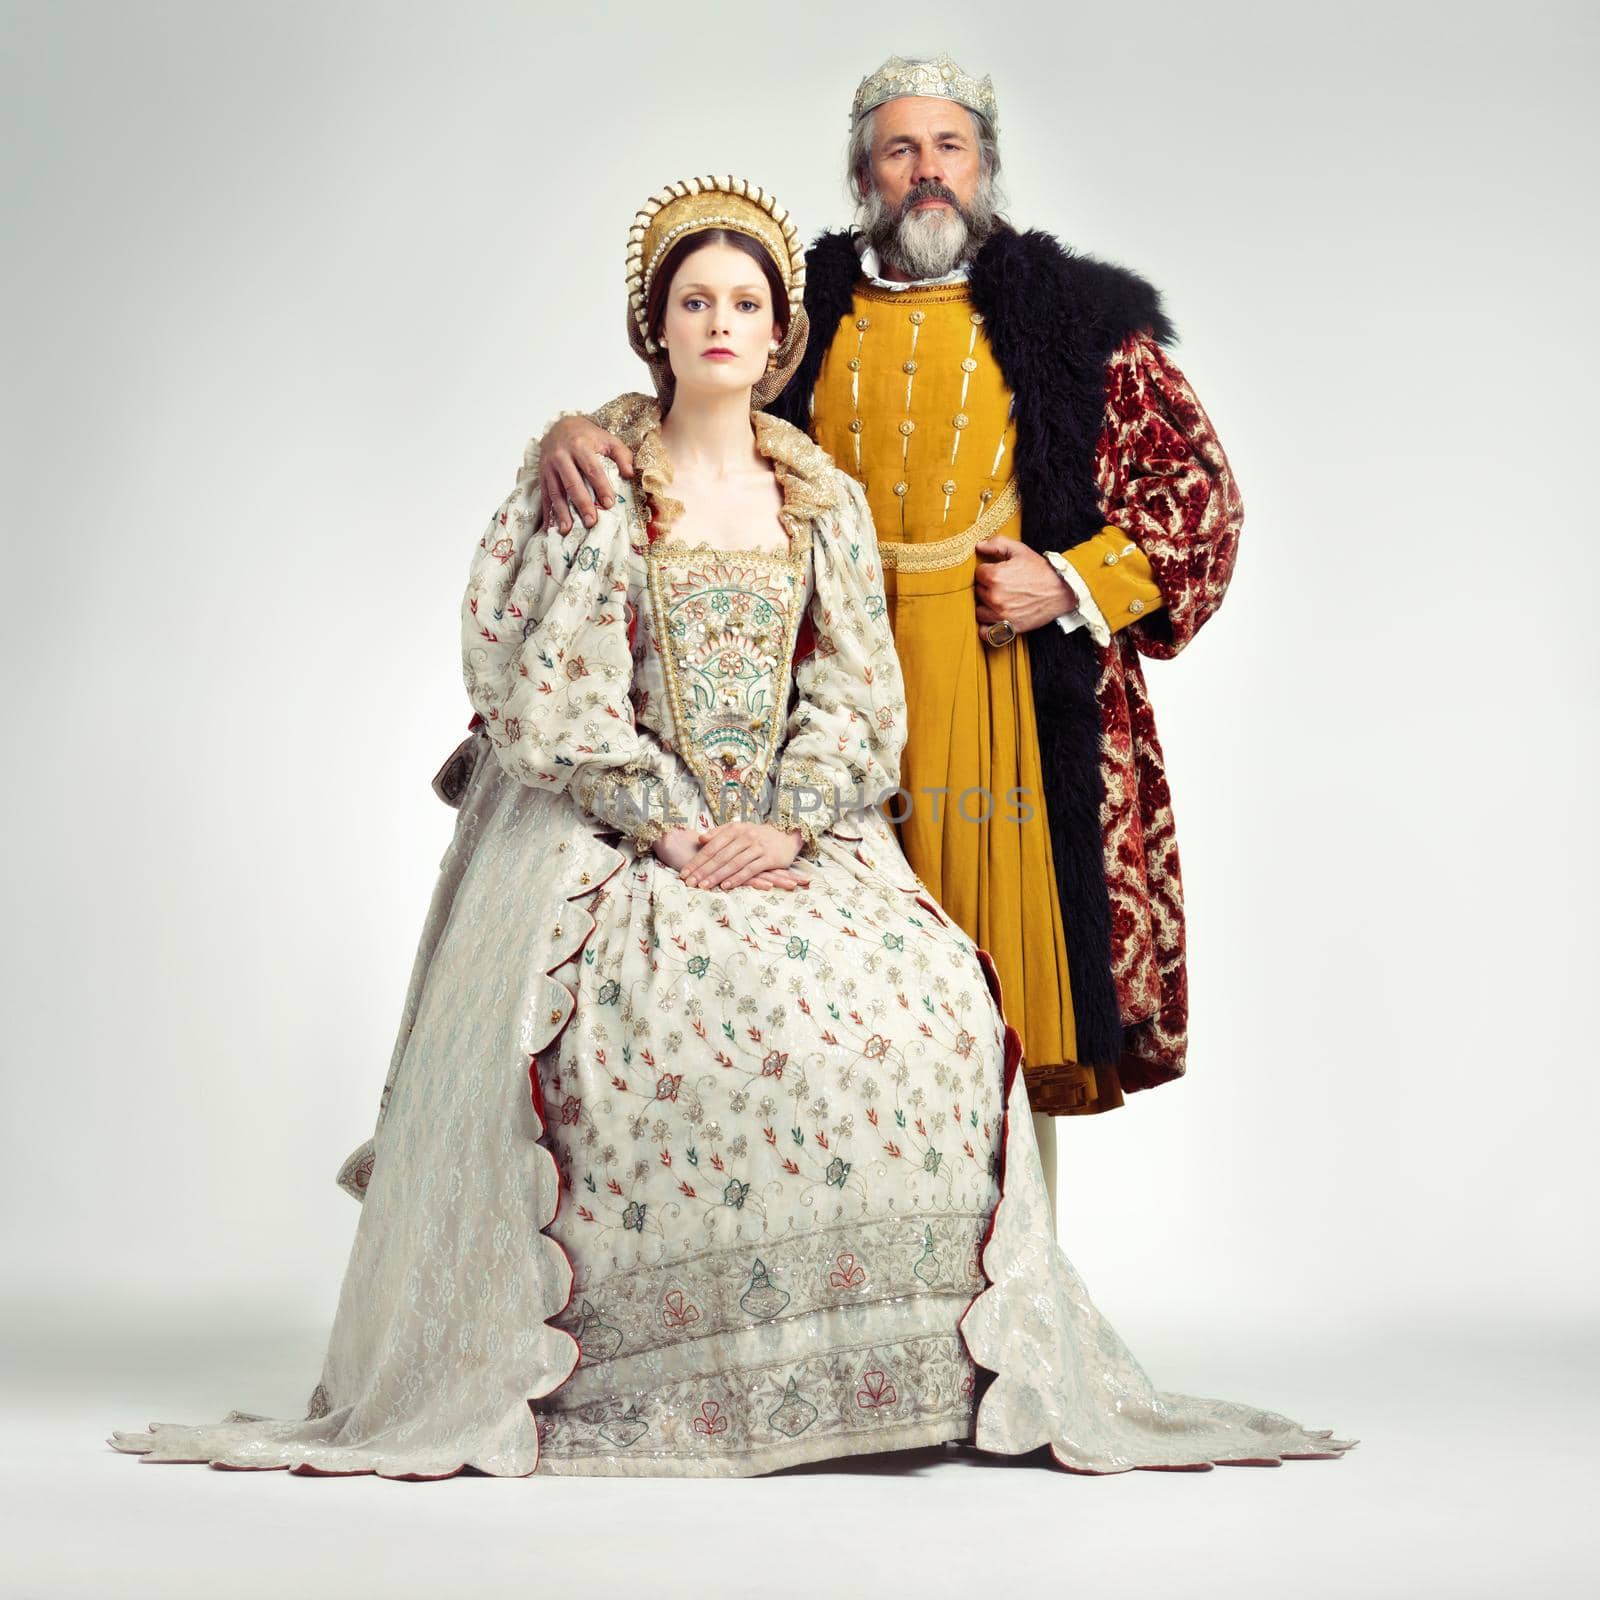 Studio shot of a regal king and queen